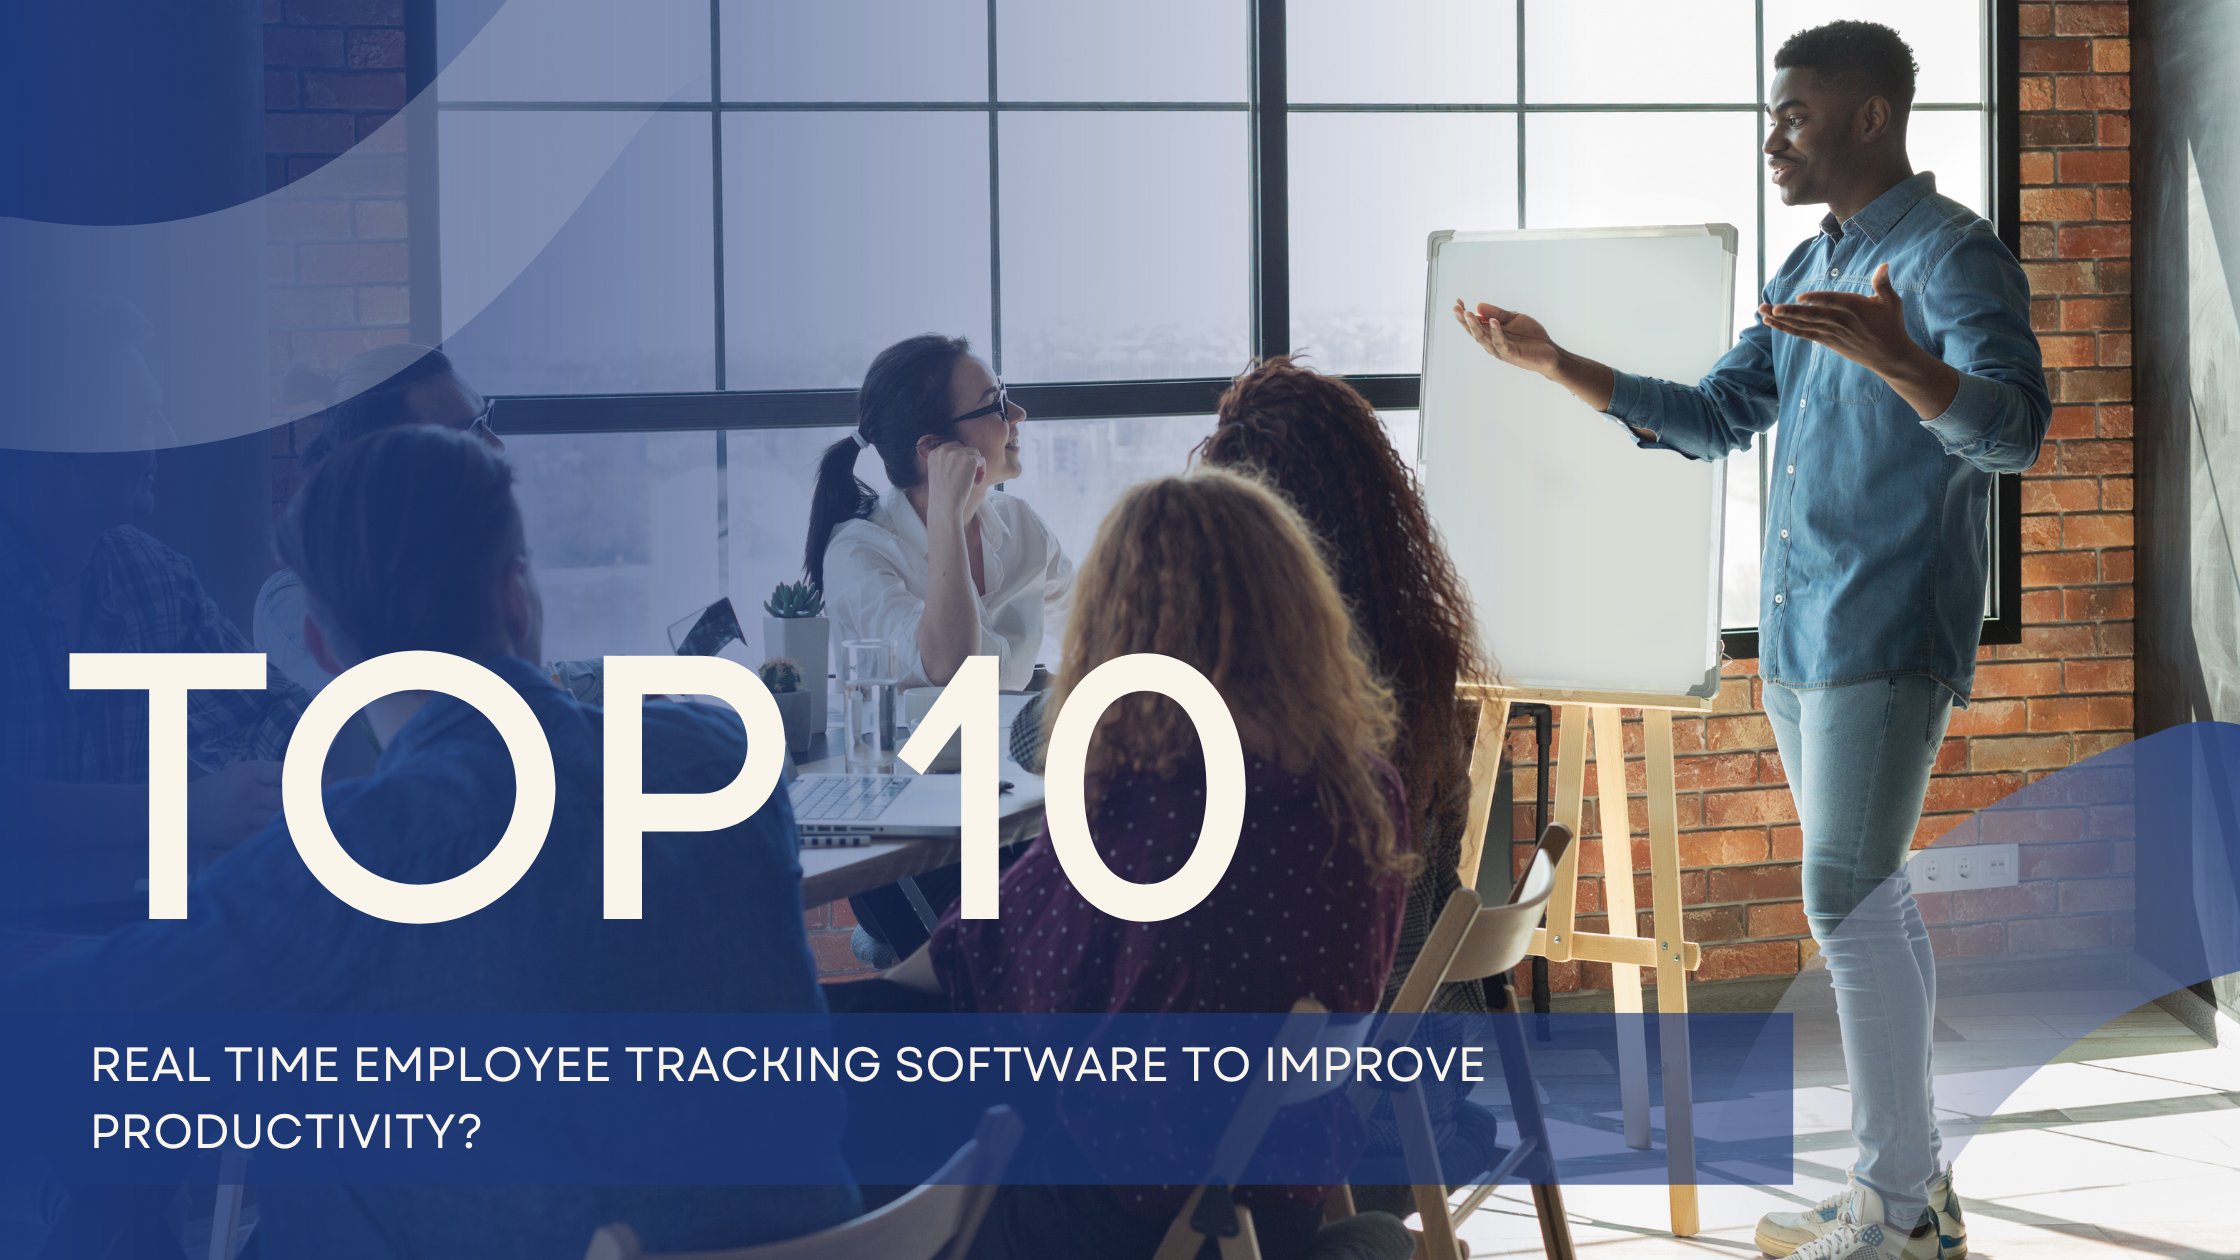 Top 10 Employee Tracking software